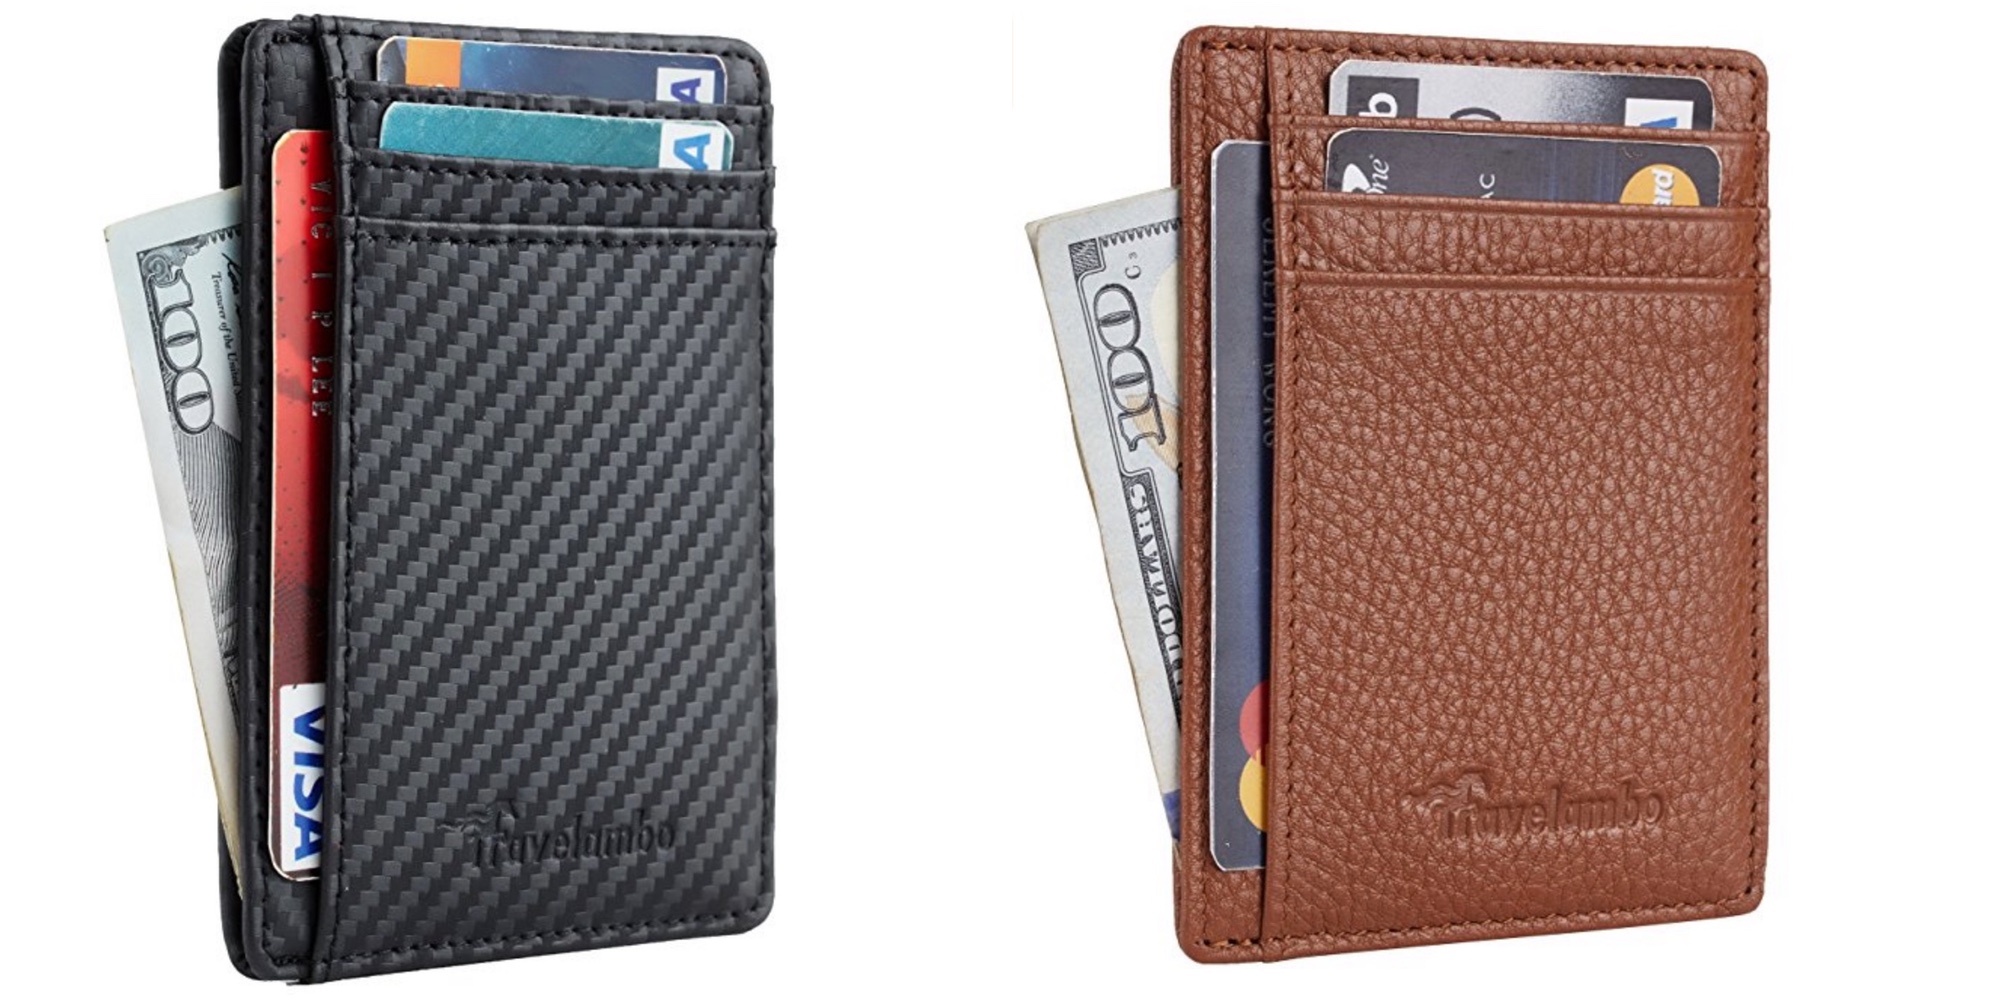 Front Pocket Leather Slim Wallets w/ RFID Blocking for $12 Prime shipped